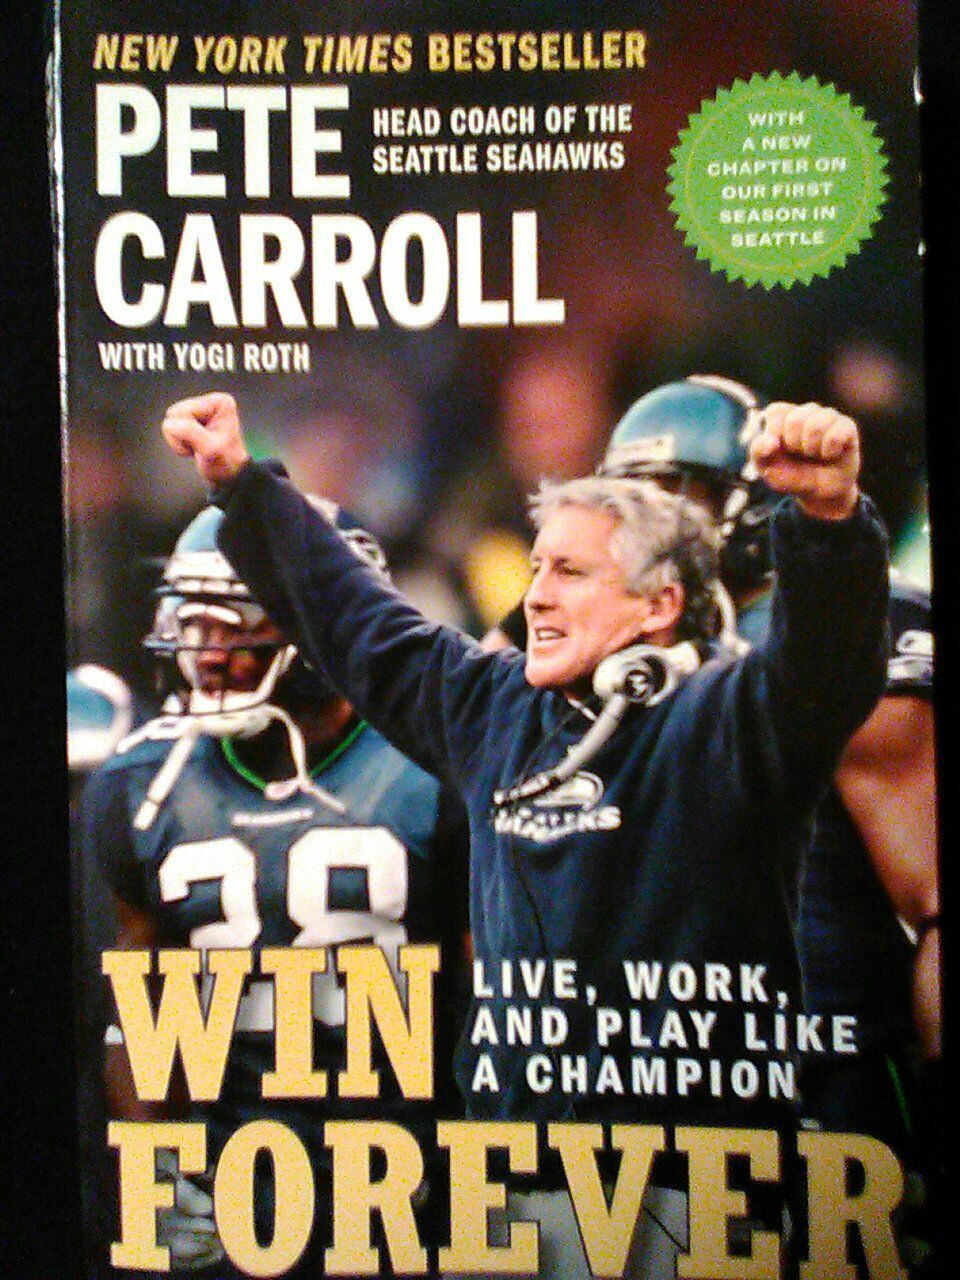 "Win Forever" book